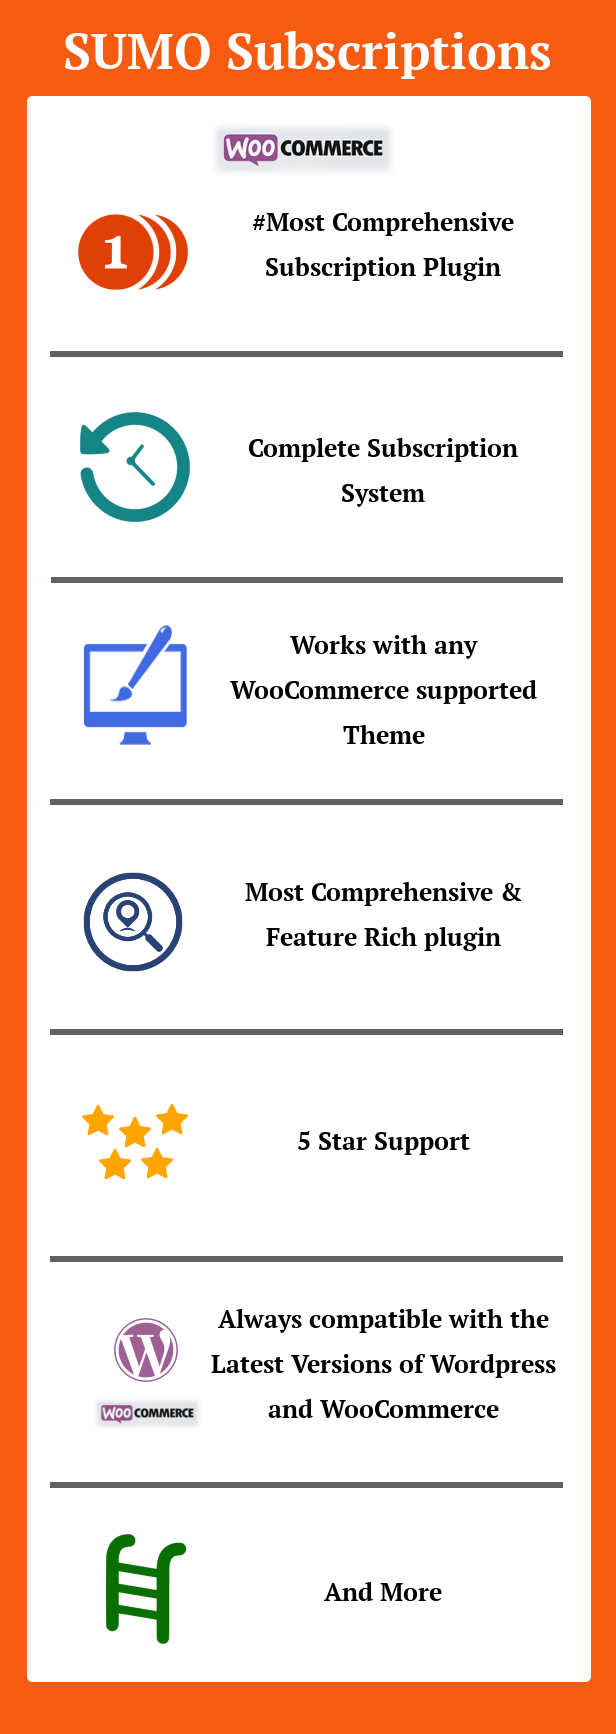 SUMO Subscriptions - WooCommerce Subscription System - 1